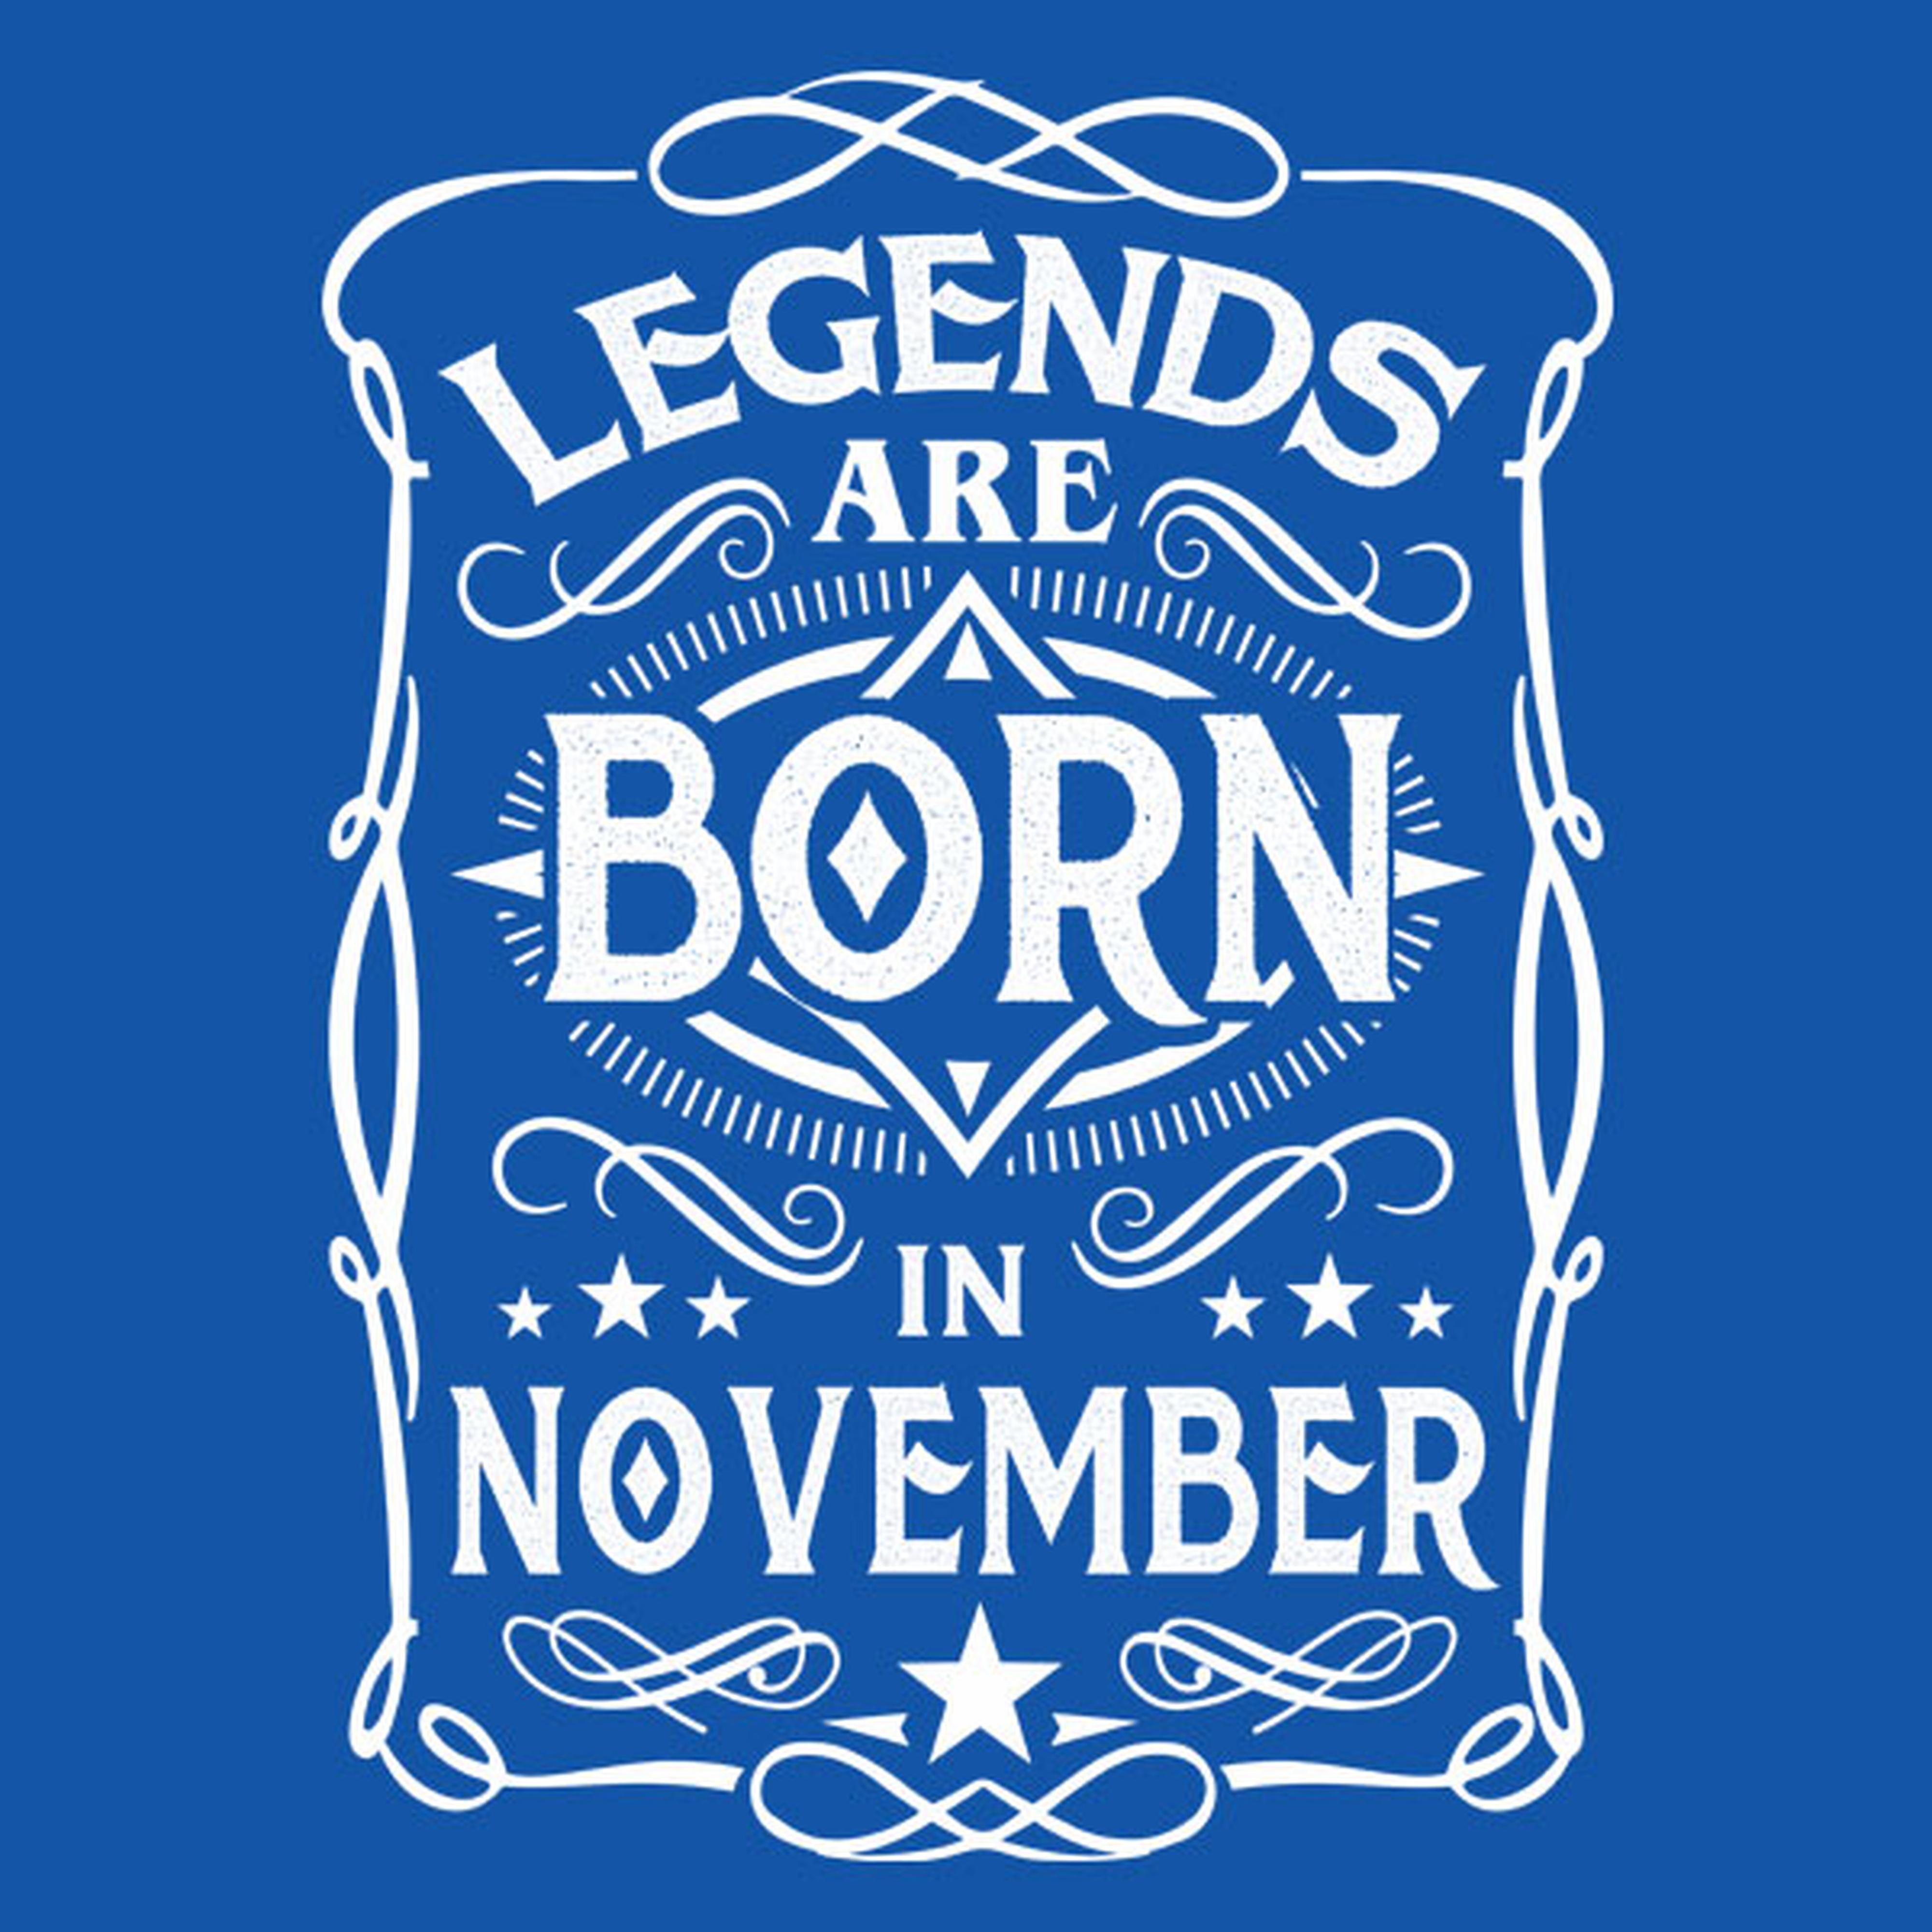 Legends are born in November - T-shirt